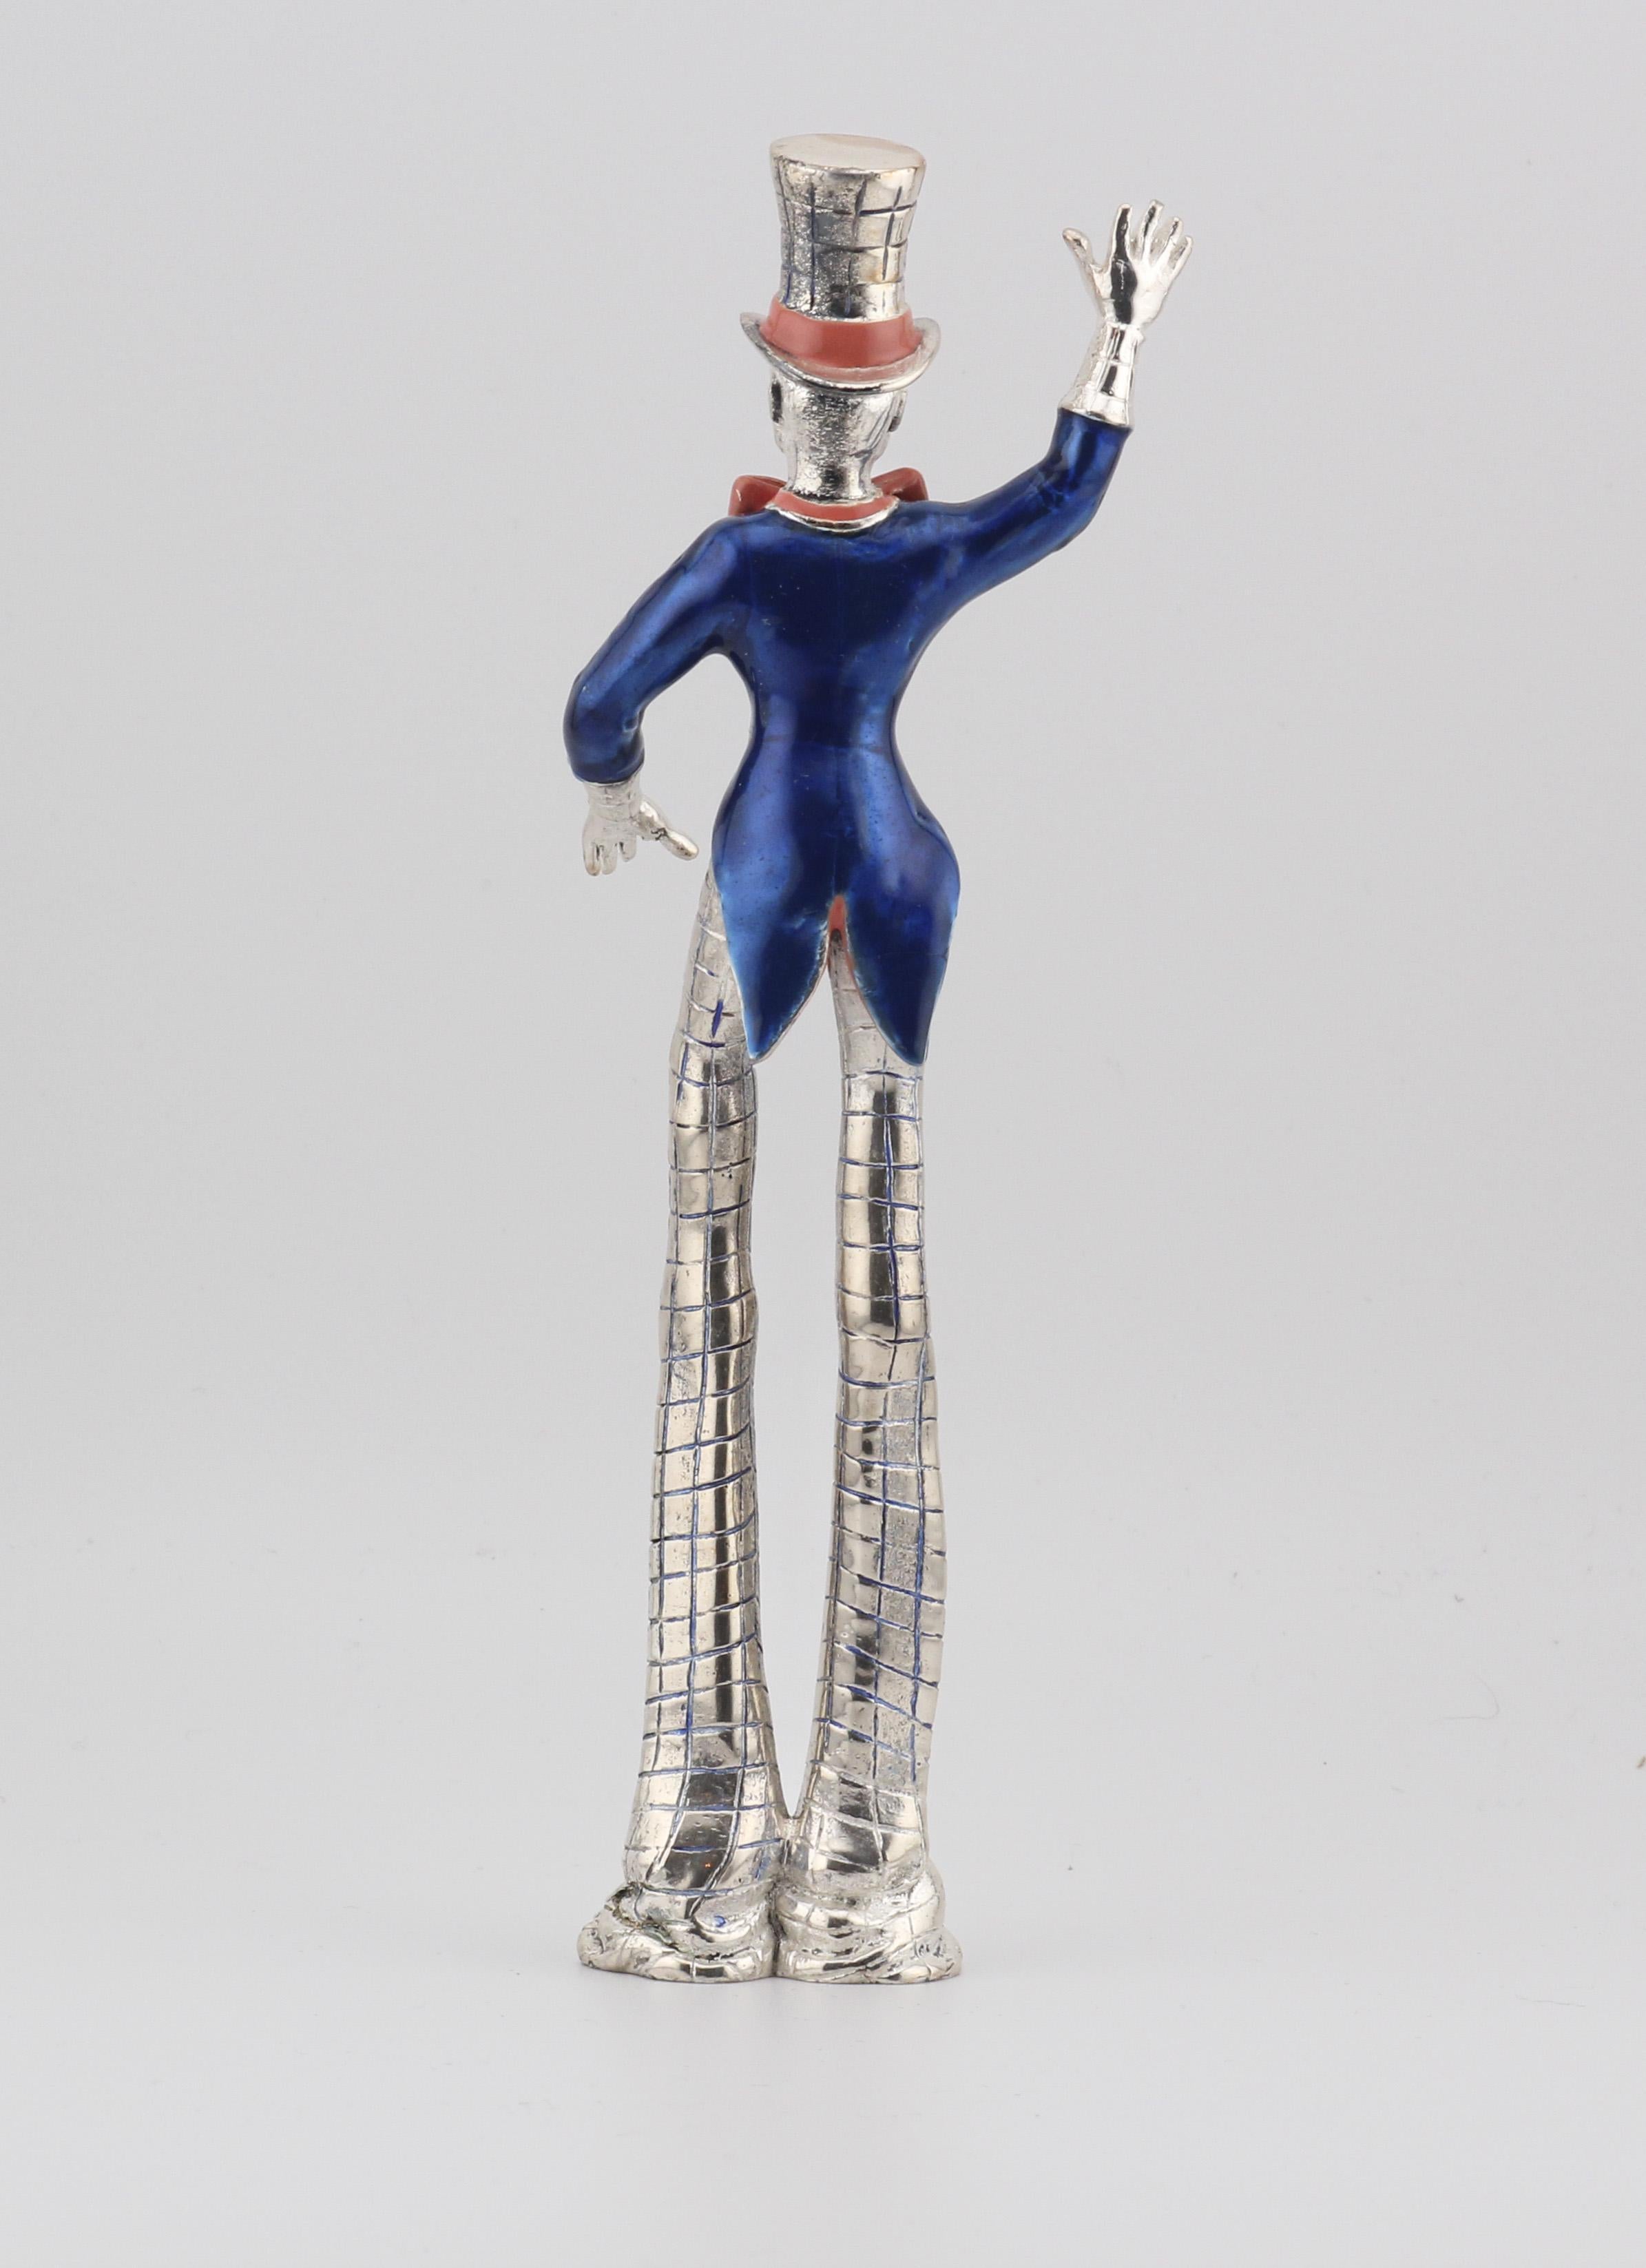 Tiffany & Co. Gene Moore Circus Clown on Stilts Enamel Sterling Silver Figurine In Good Condition For Sale In Bellmore, NY